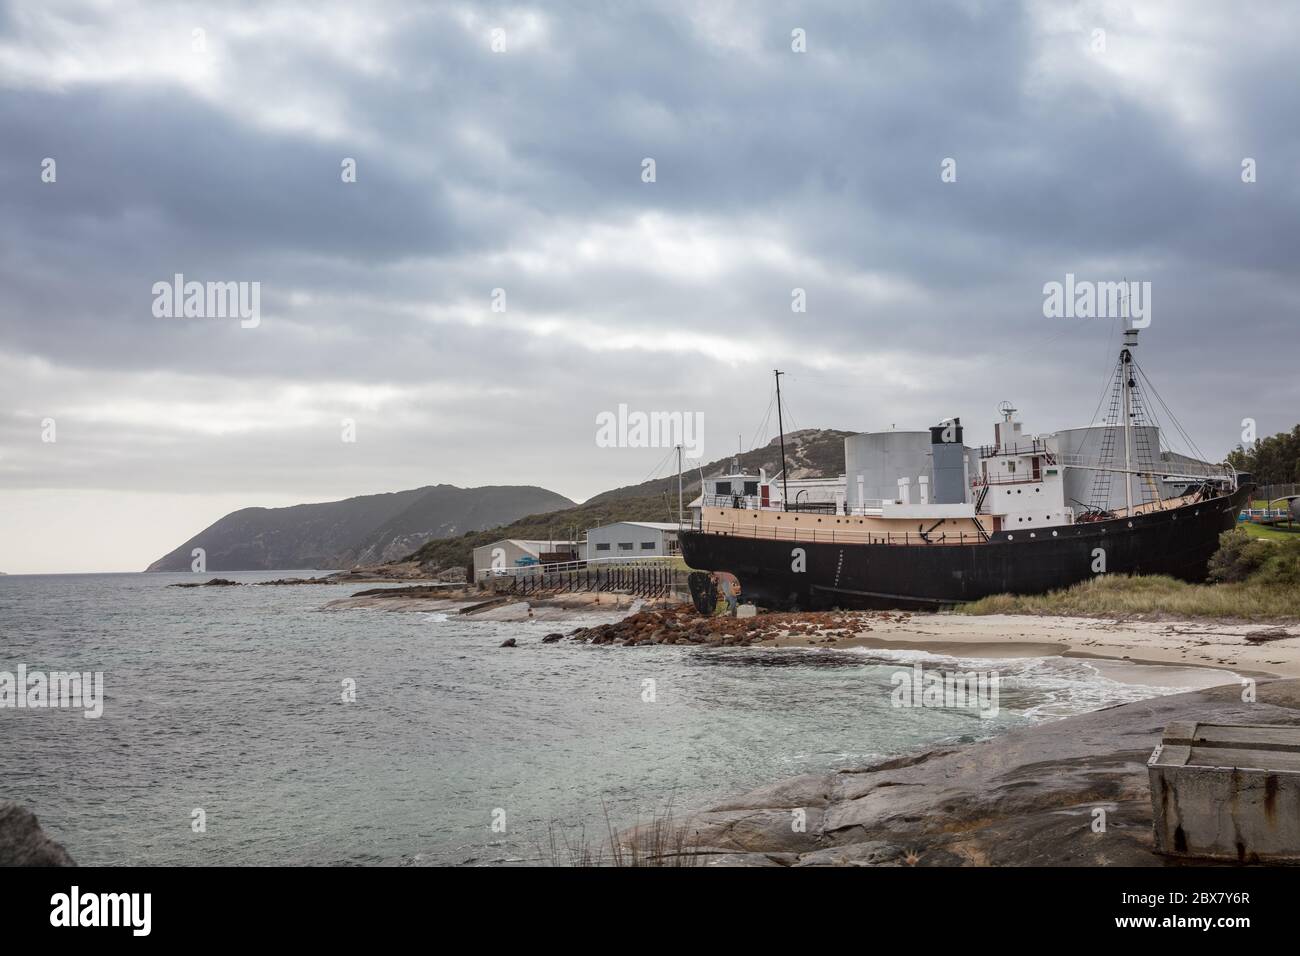 Albany Western Australia November 10th 2019 : View of the Historic Whaling Station museum at Discovery Bay in Albany, Western Australia Stock Photo